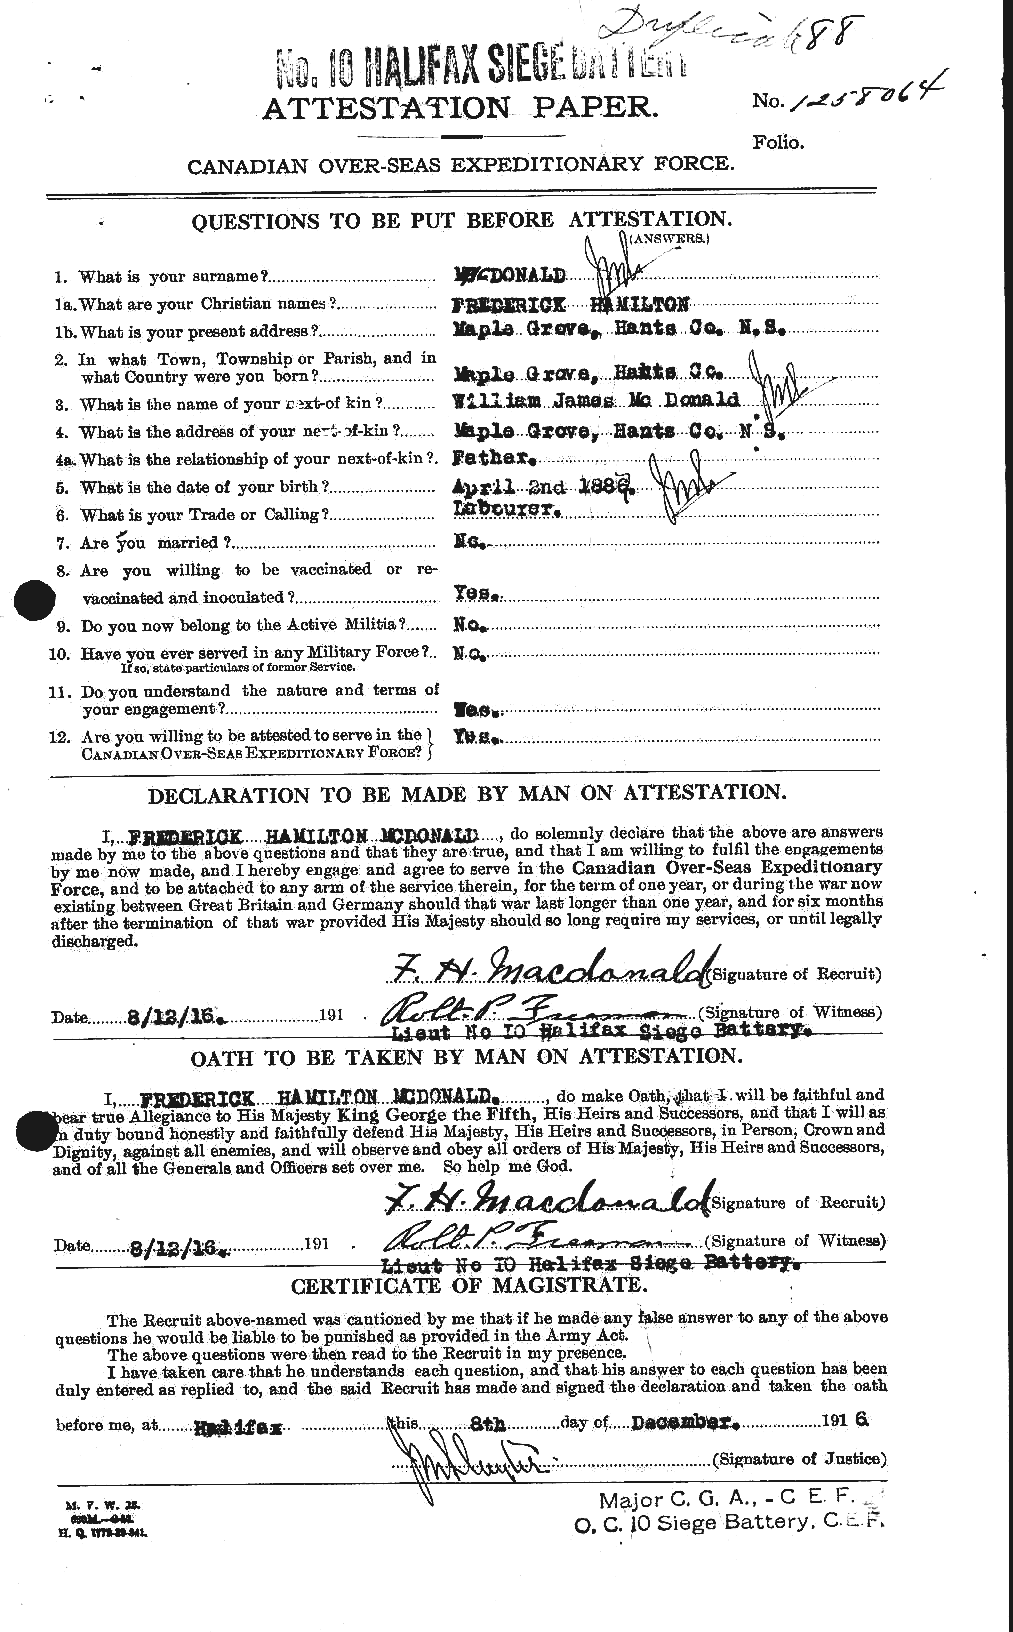 Personnel Records of the First World War - CEF 518722a